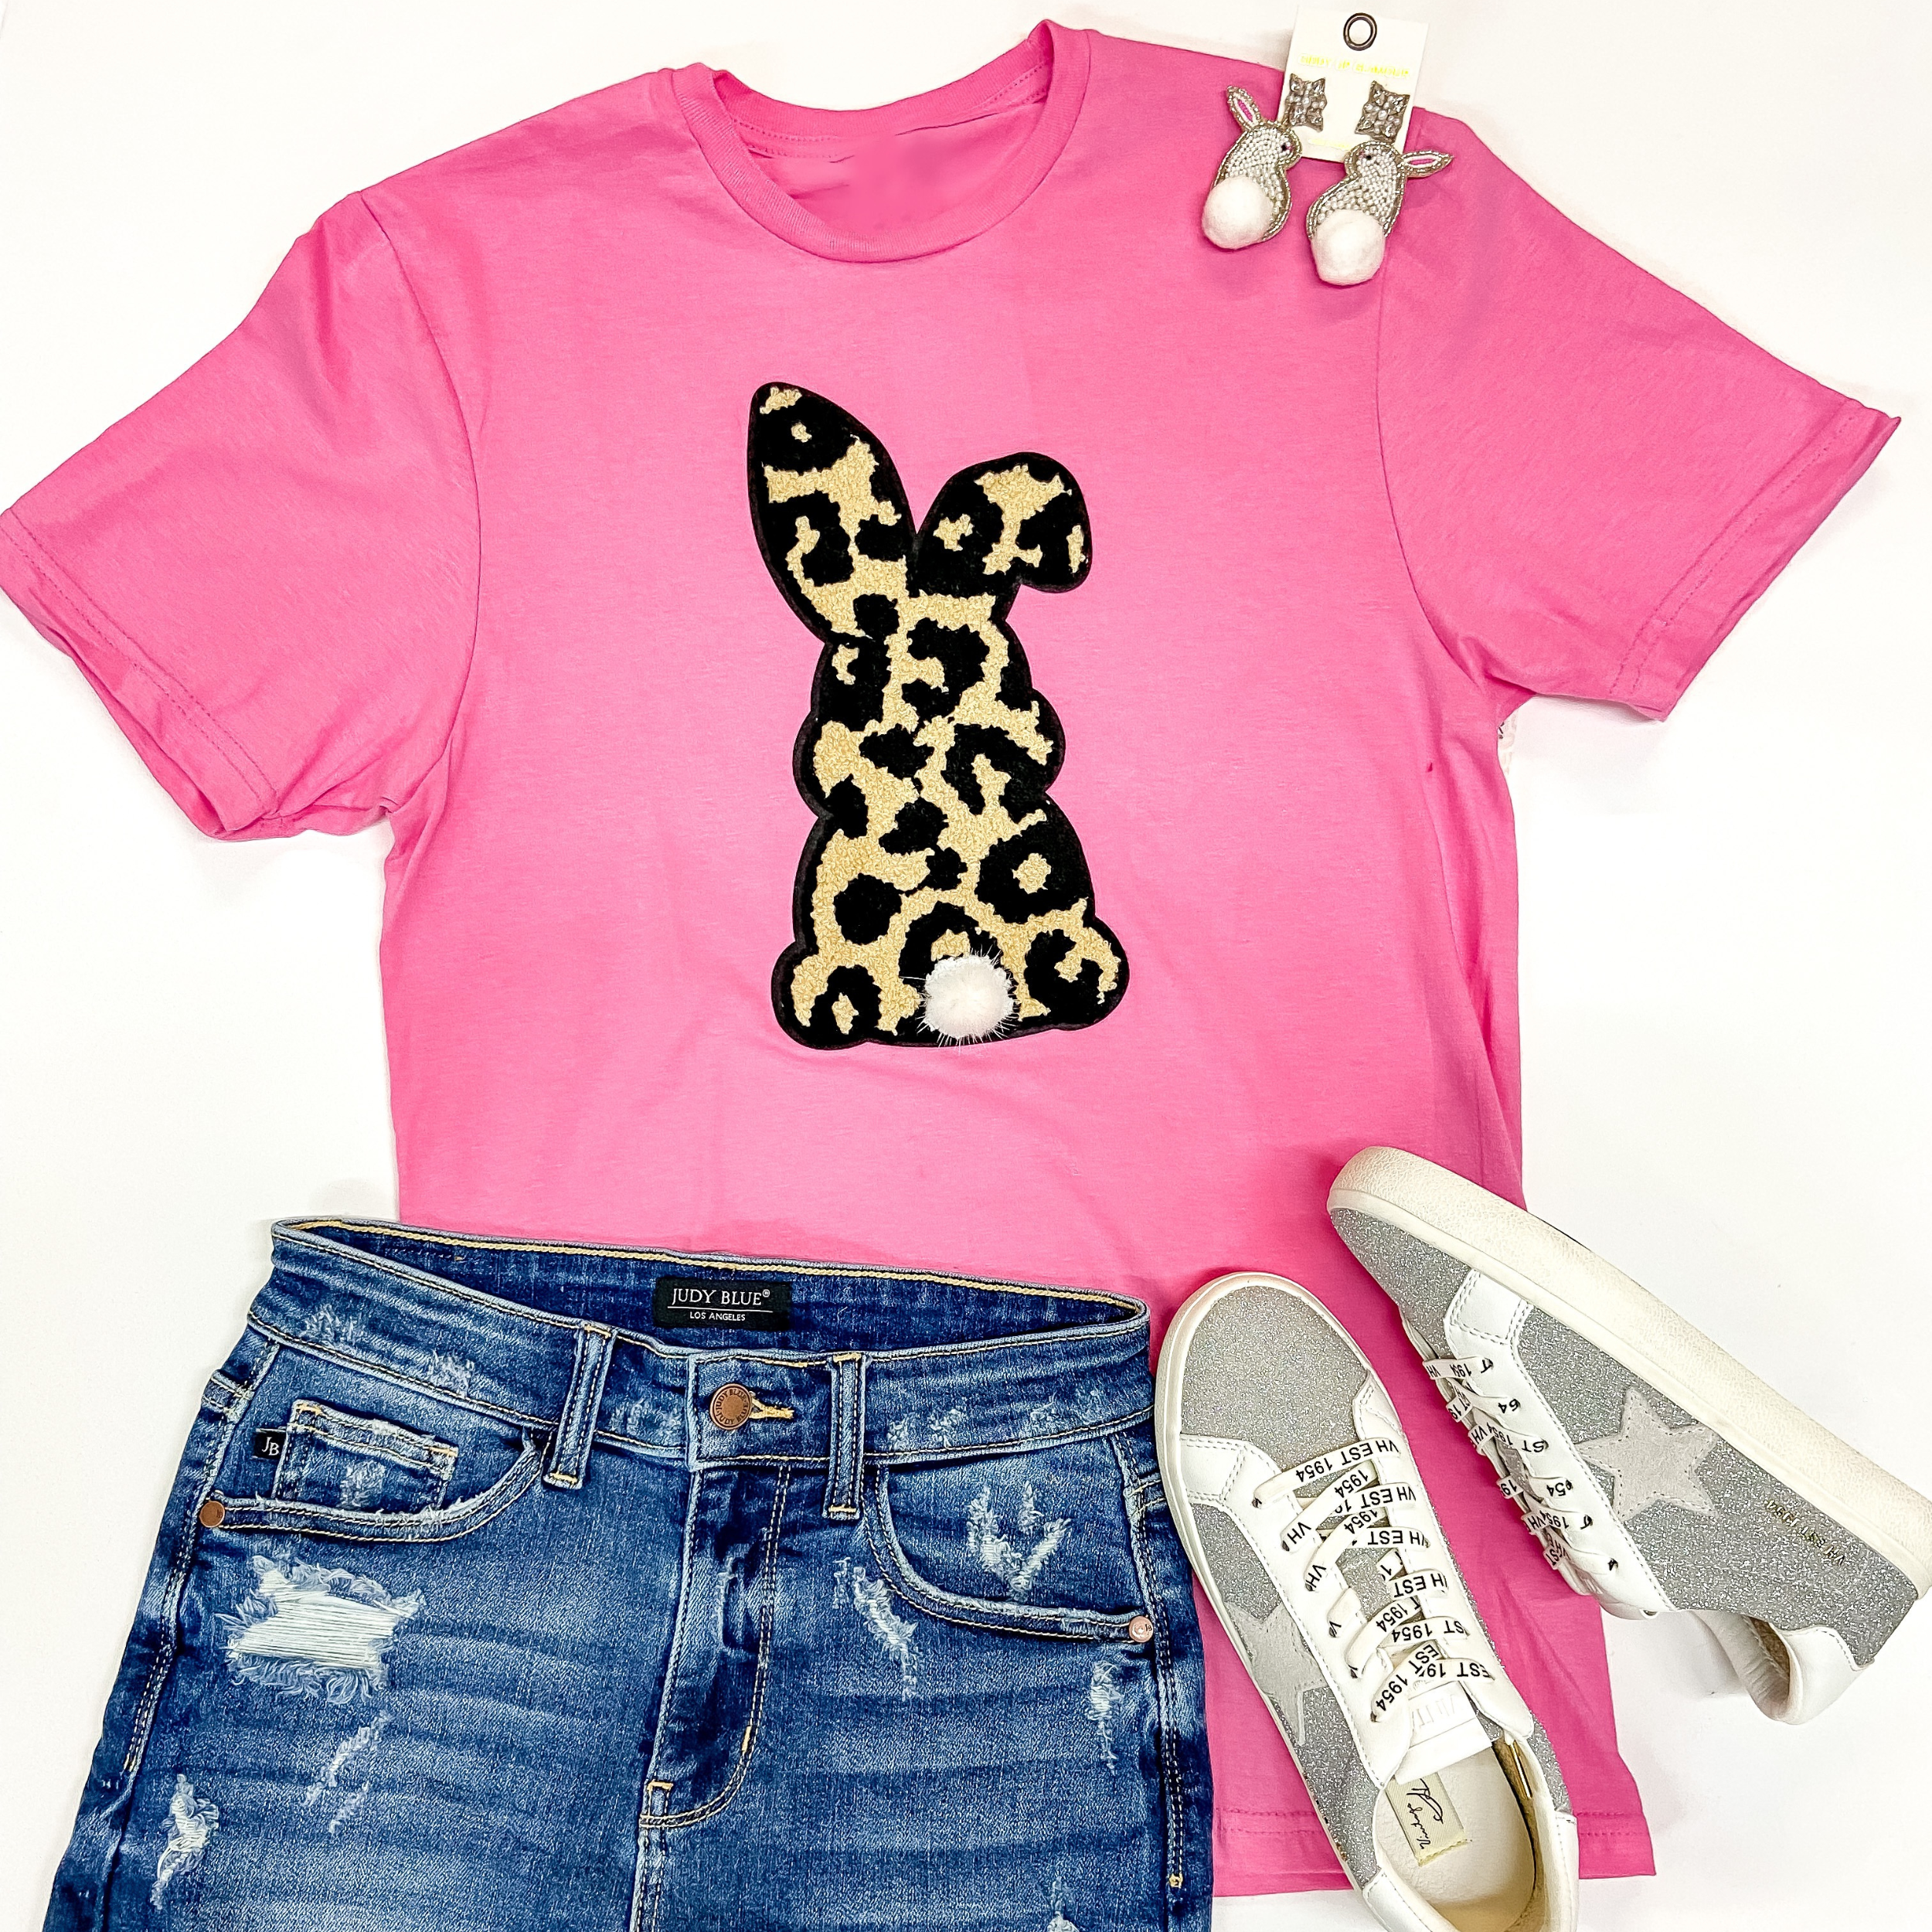  A pink short sleeve tee shirt with a crew neckline and a chenille patch that is leopard print in the shape of a bunny. This tee is pictured on a white background with silver sneakers, bunny shaped earrings, and denim shorts.